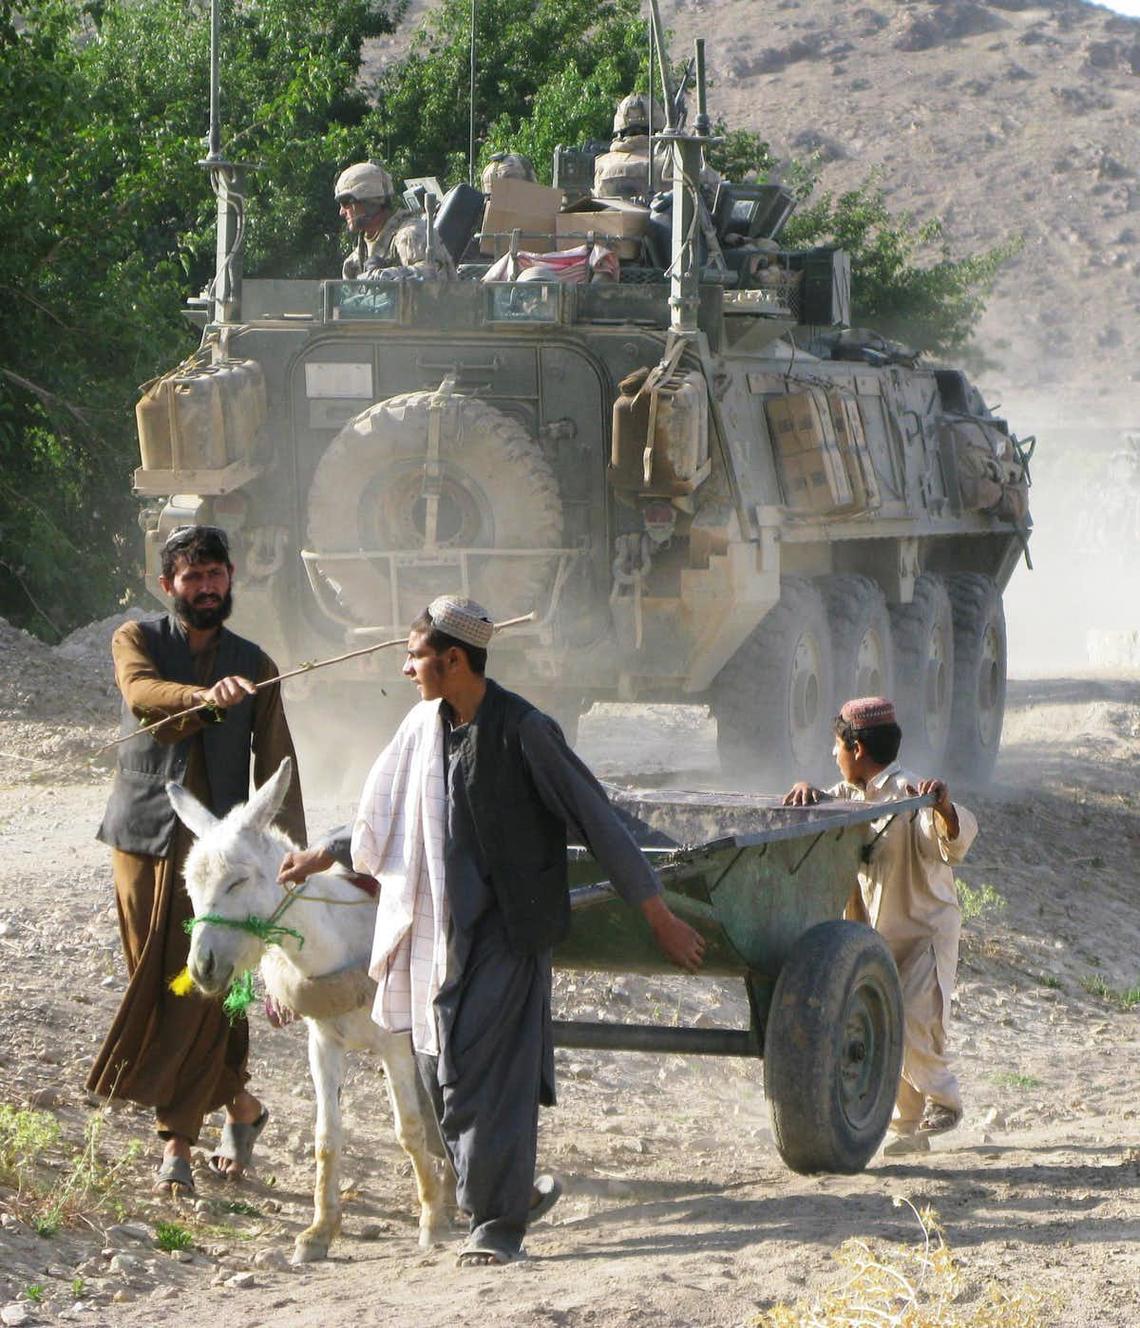 A Canadian Forces LAV passes by a group of Afghans and their donkey in the Arghandab district just north of Kandahar city on Sunday, June 14, 2009. The Canadians were providing support to an Afghan National Police sweep of the area.